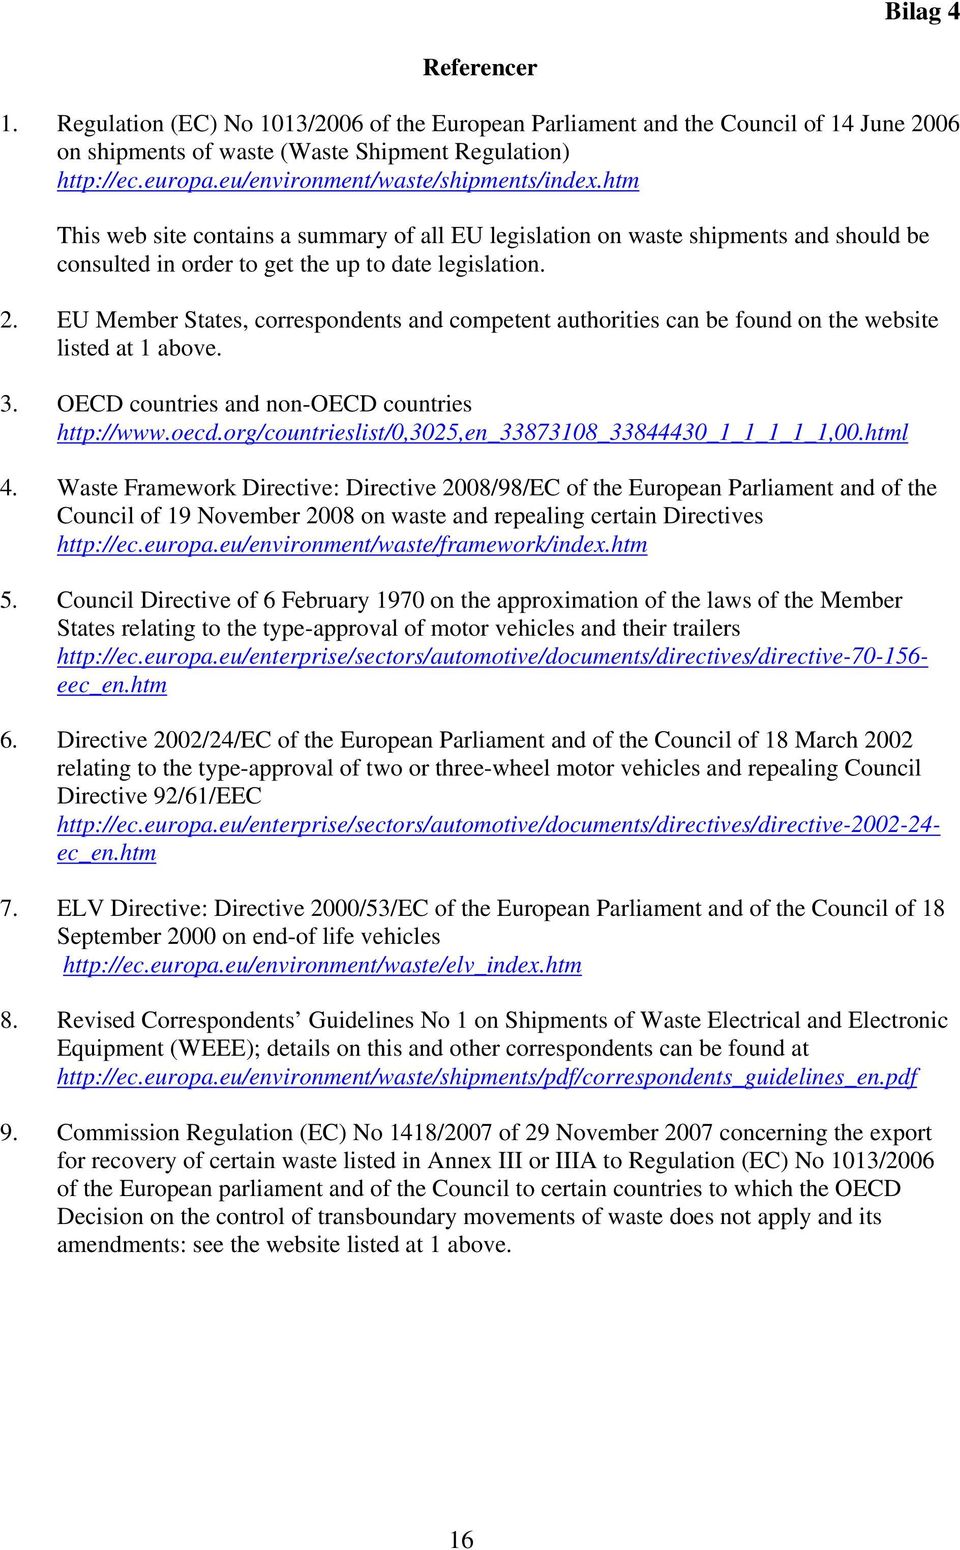 EU Member States, correspondents and competent authorities can be found on the website listed at 1 above. 3. OECD countries and non-oecd countries http://www.oecd.org/countrieslist/0,3025,en_33873108_33844430_1_1_1_1_1,00.